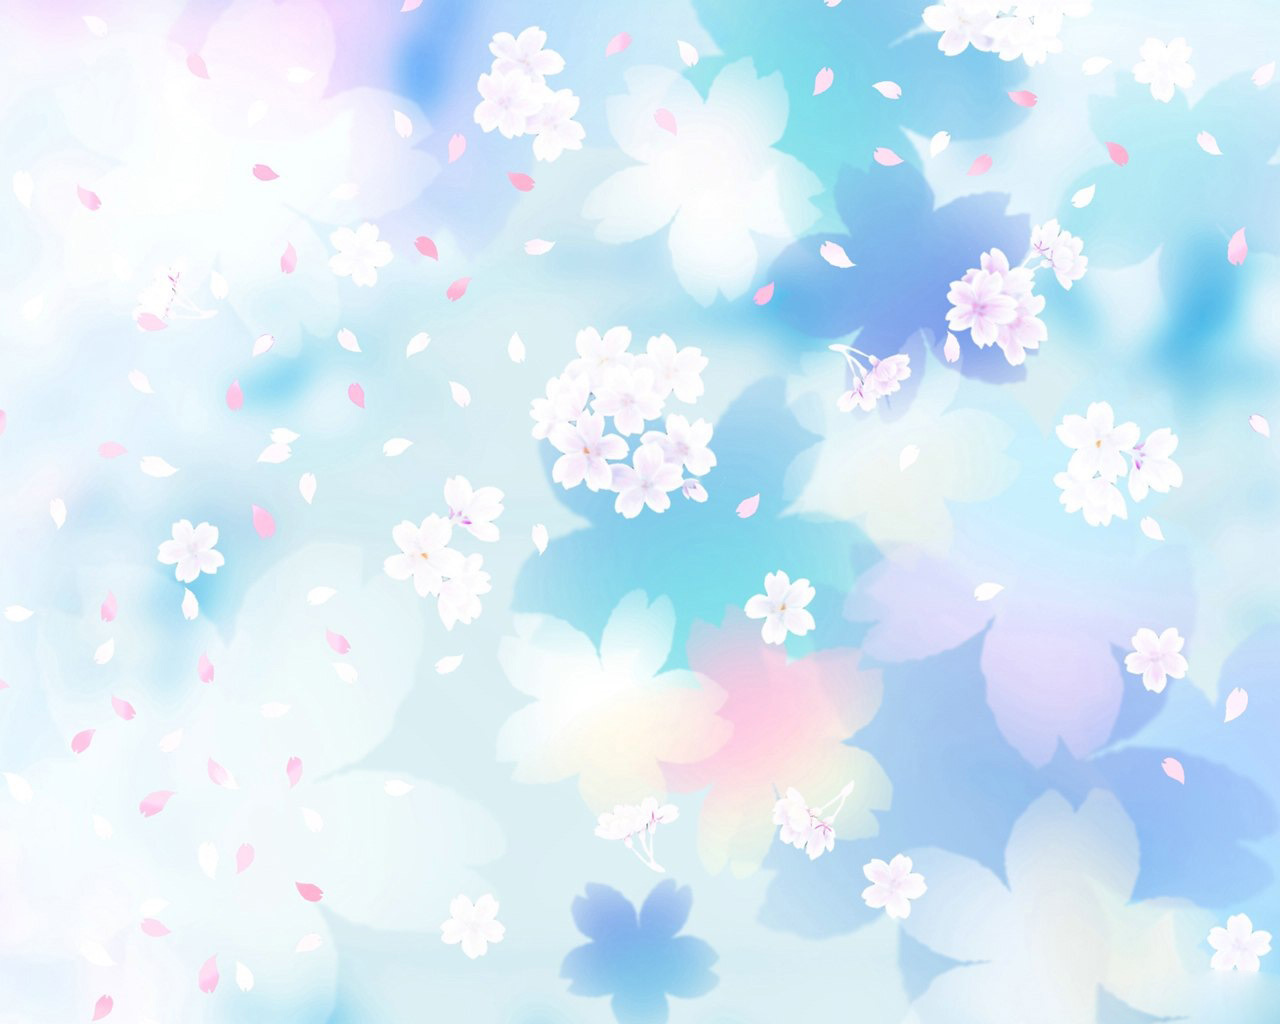  Blue And White Flowers Backgrounds Wallpaper Full HD Wallpapers